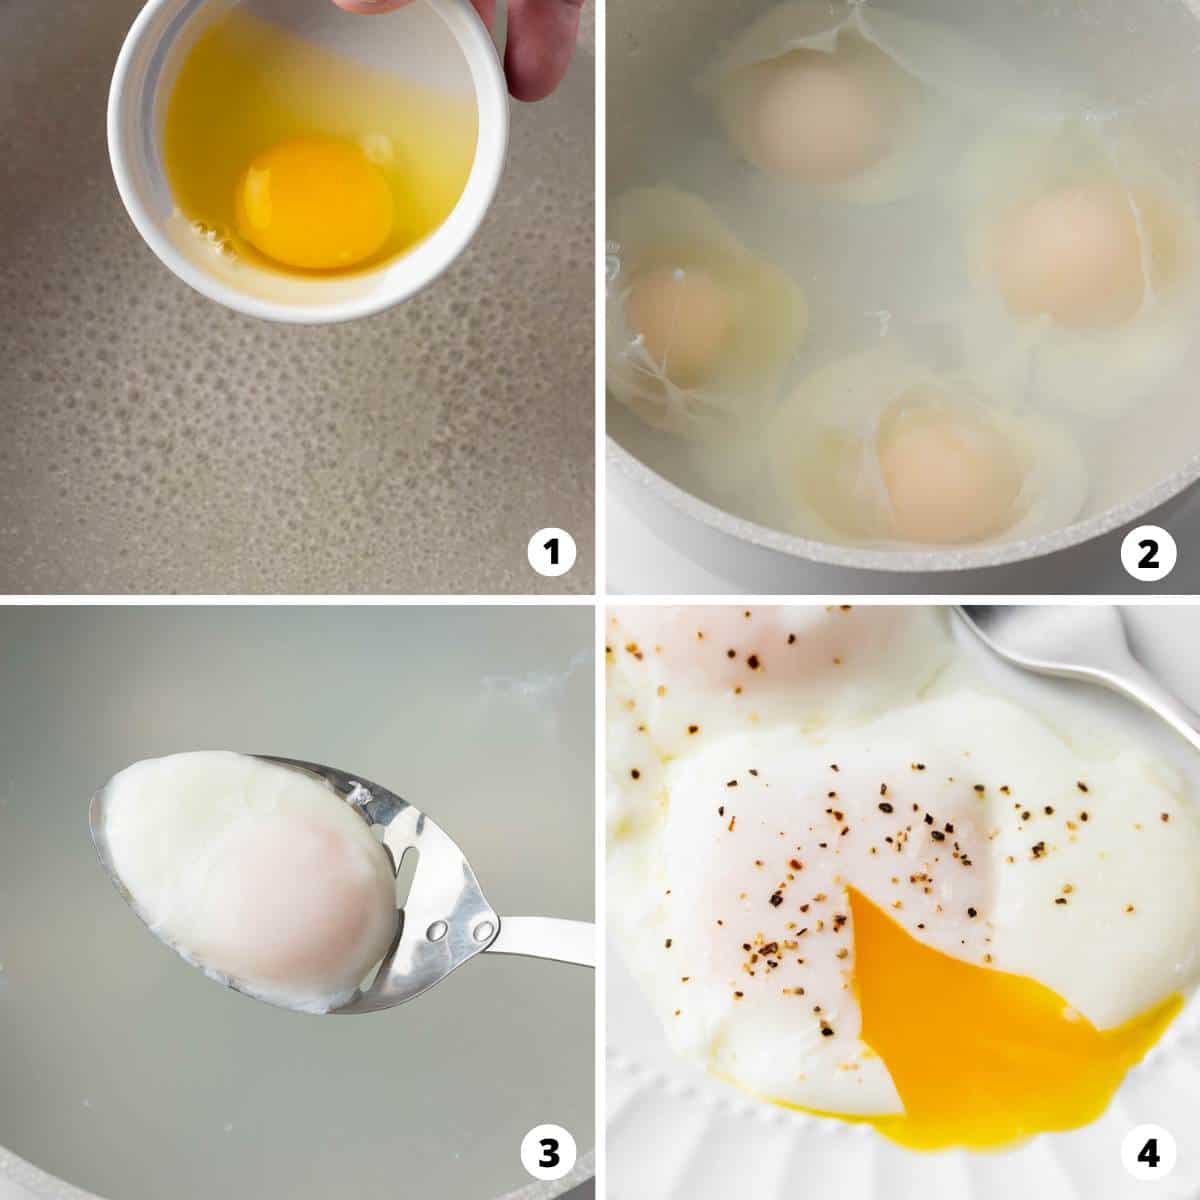 Showing how to make poached eggs in a 4 step collage.